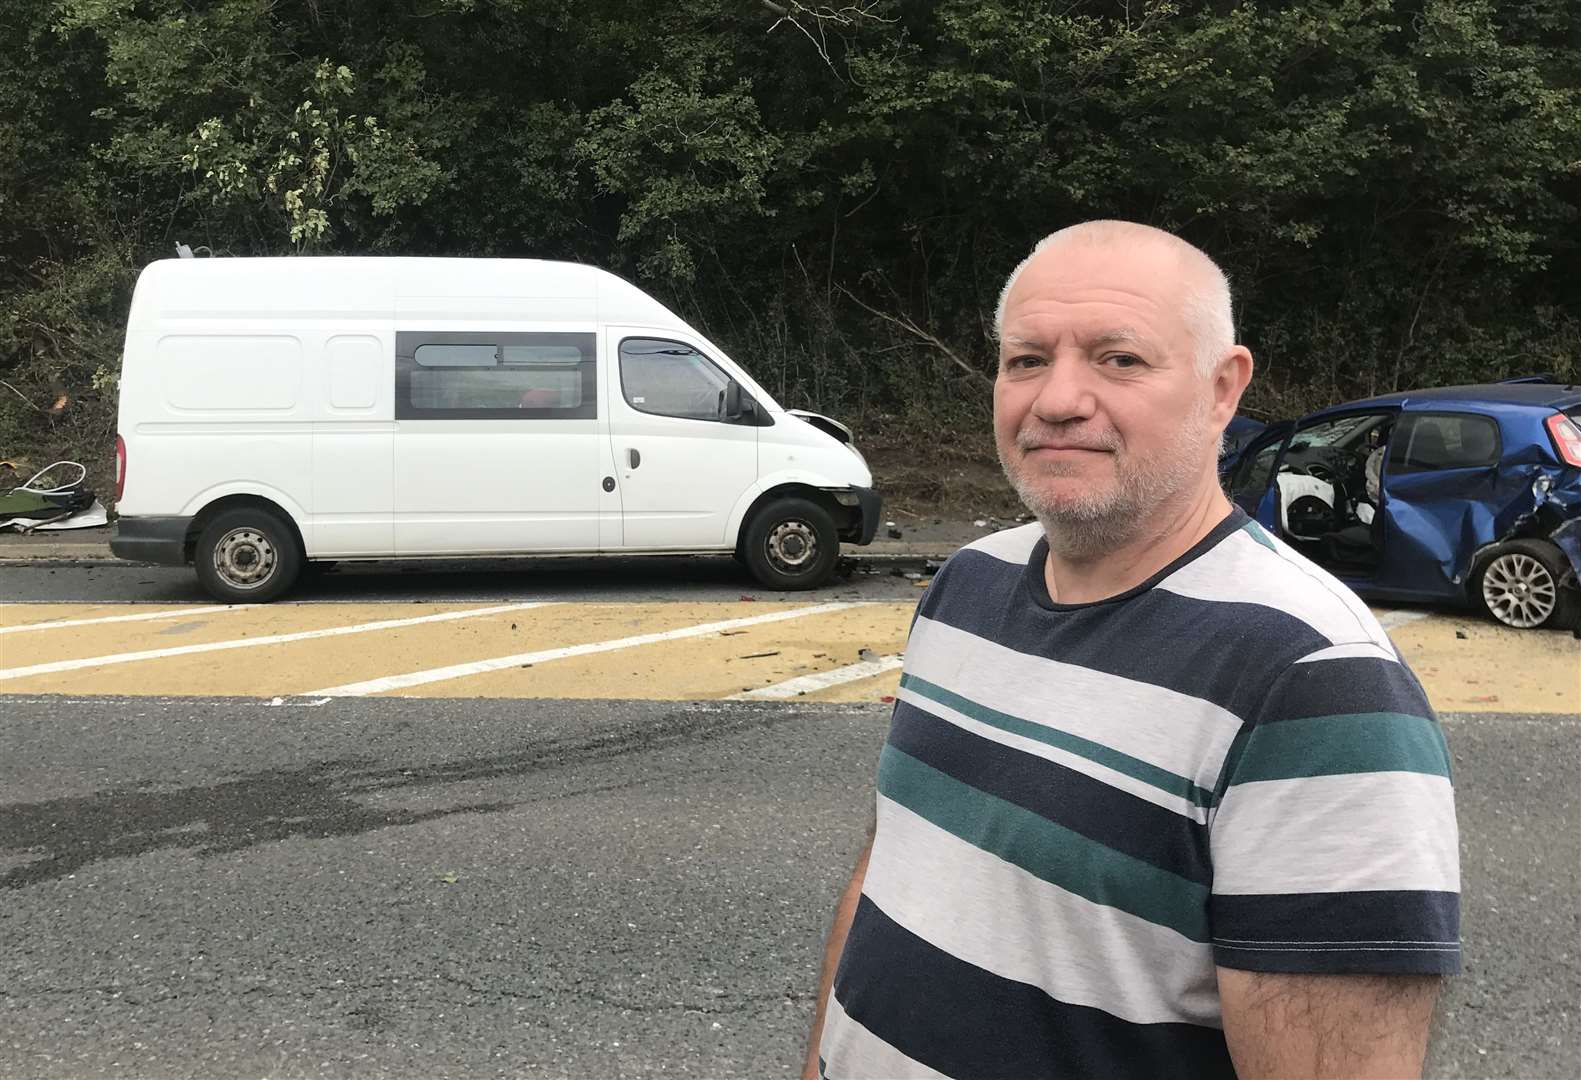 Tim Rogers, nicknamed Lucky by workmates, says he narrowly avoided being hit by the lorry travelling the opposite direction during the crash in Cuxton